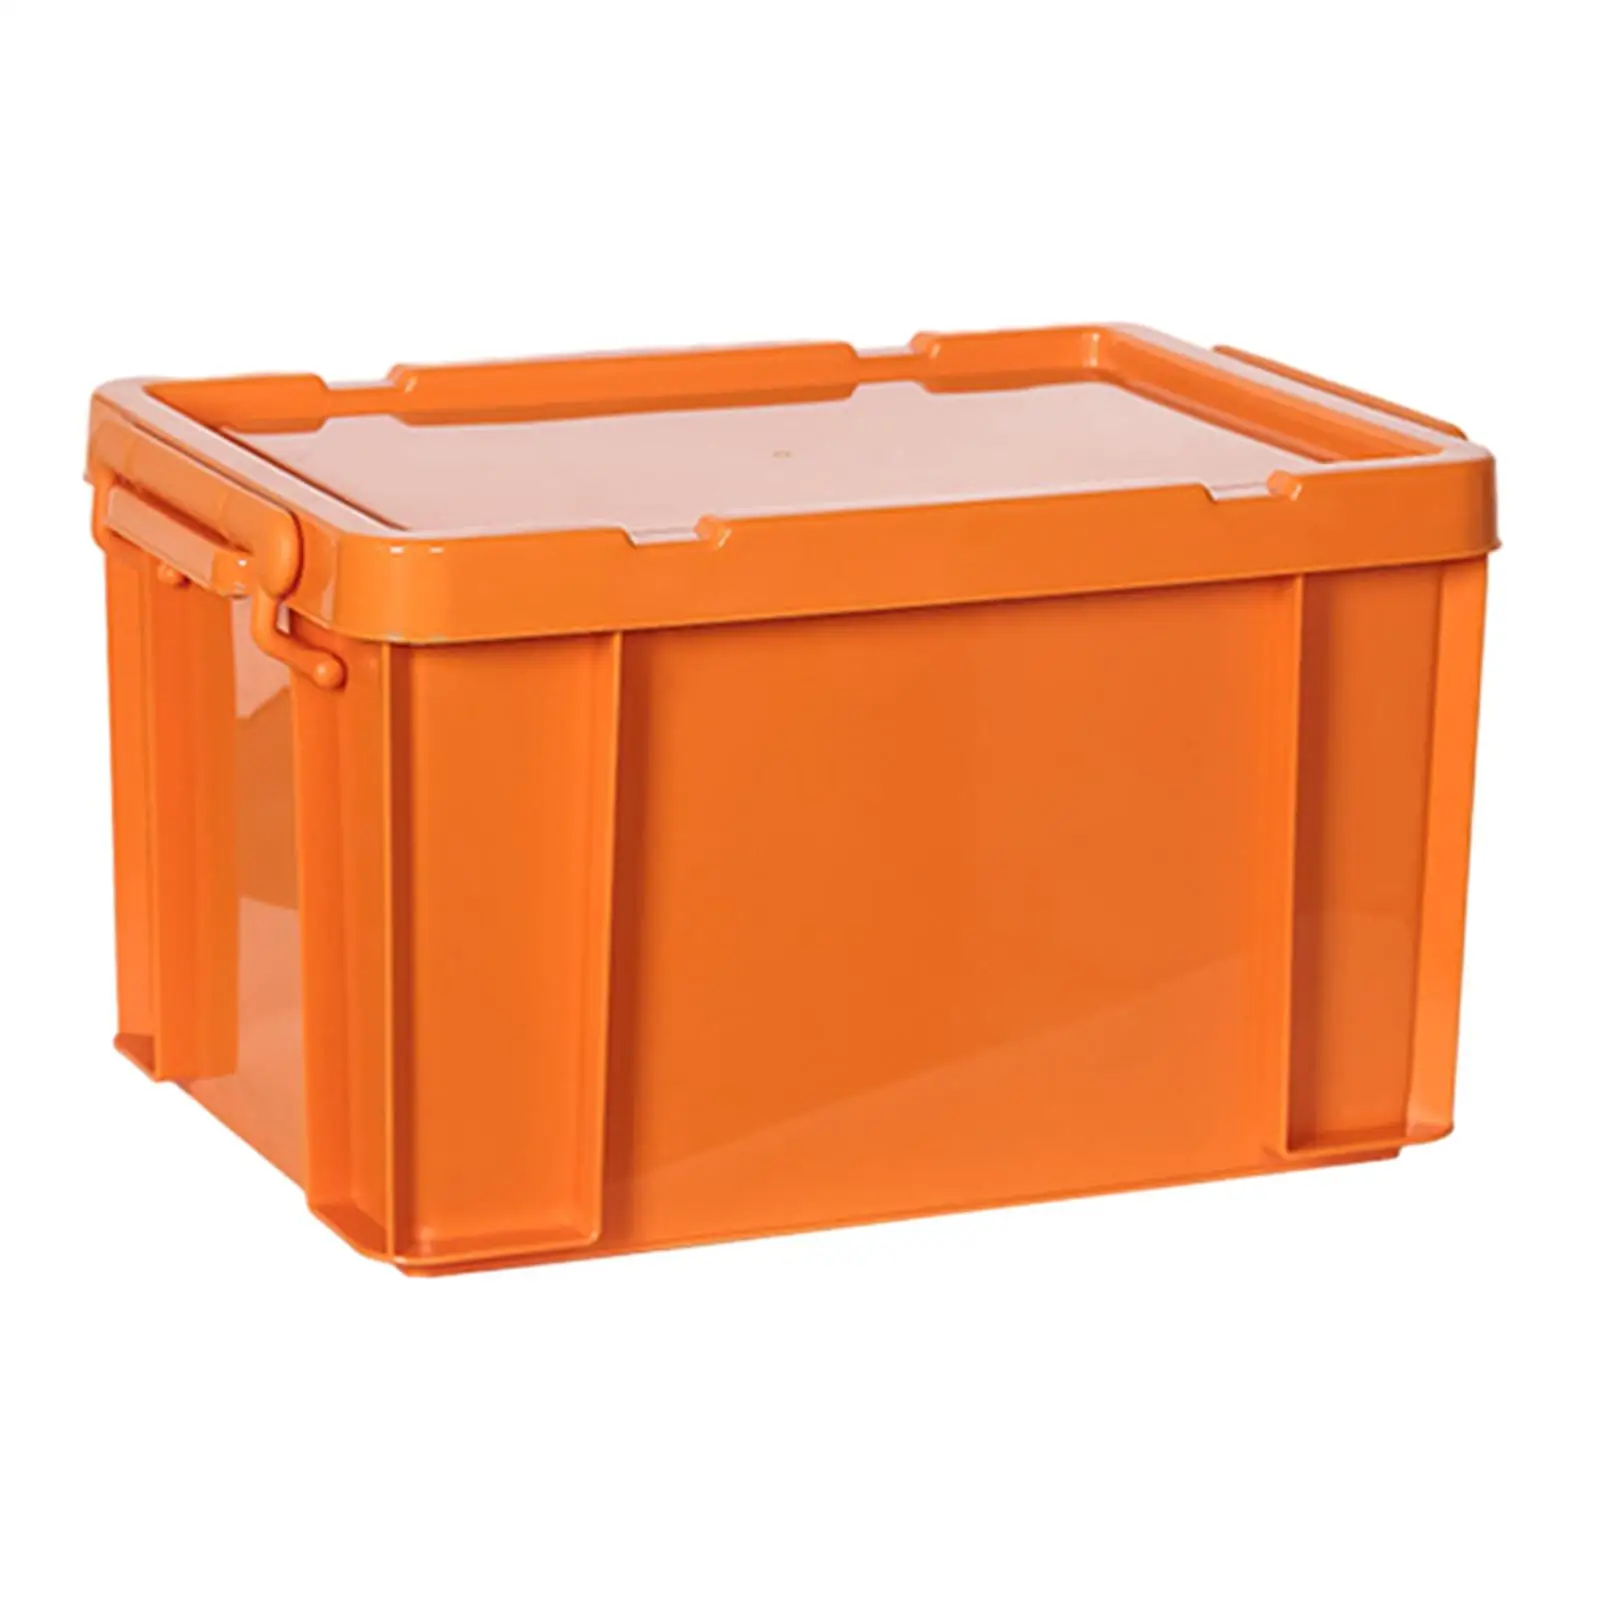 PP Storage Box Heavy Duty Storage Bins Durable Stackable Storage Containers for Garage Moving House Storage Room Shoes Clothes